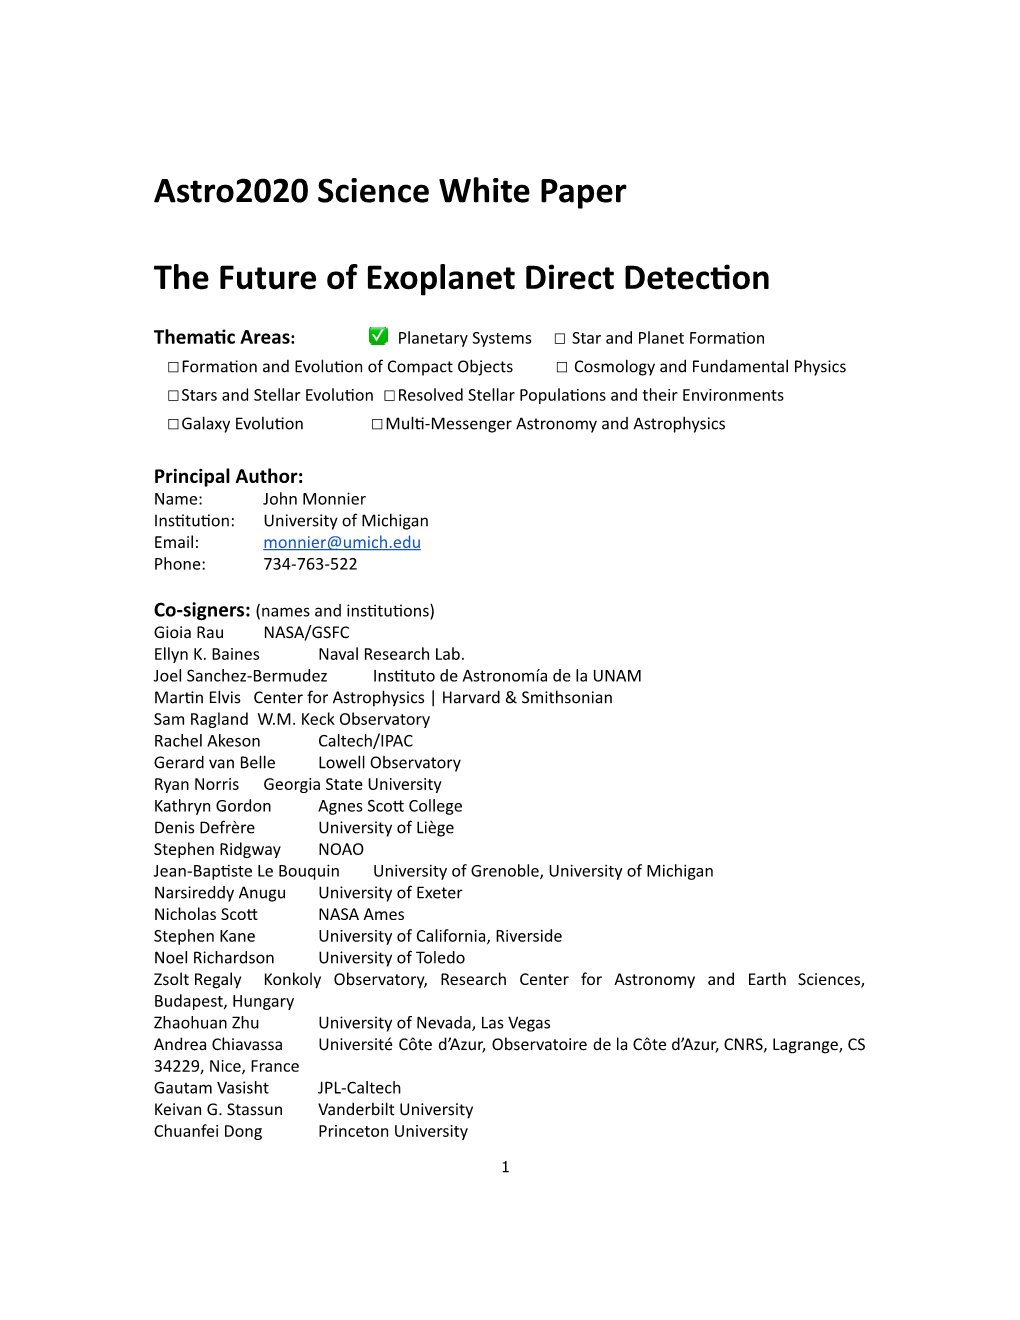 Astro2020 Science White Paper the Future of Exoplanet Direct Detec On